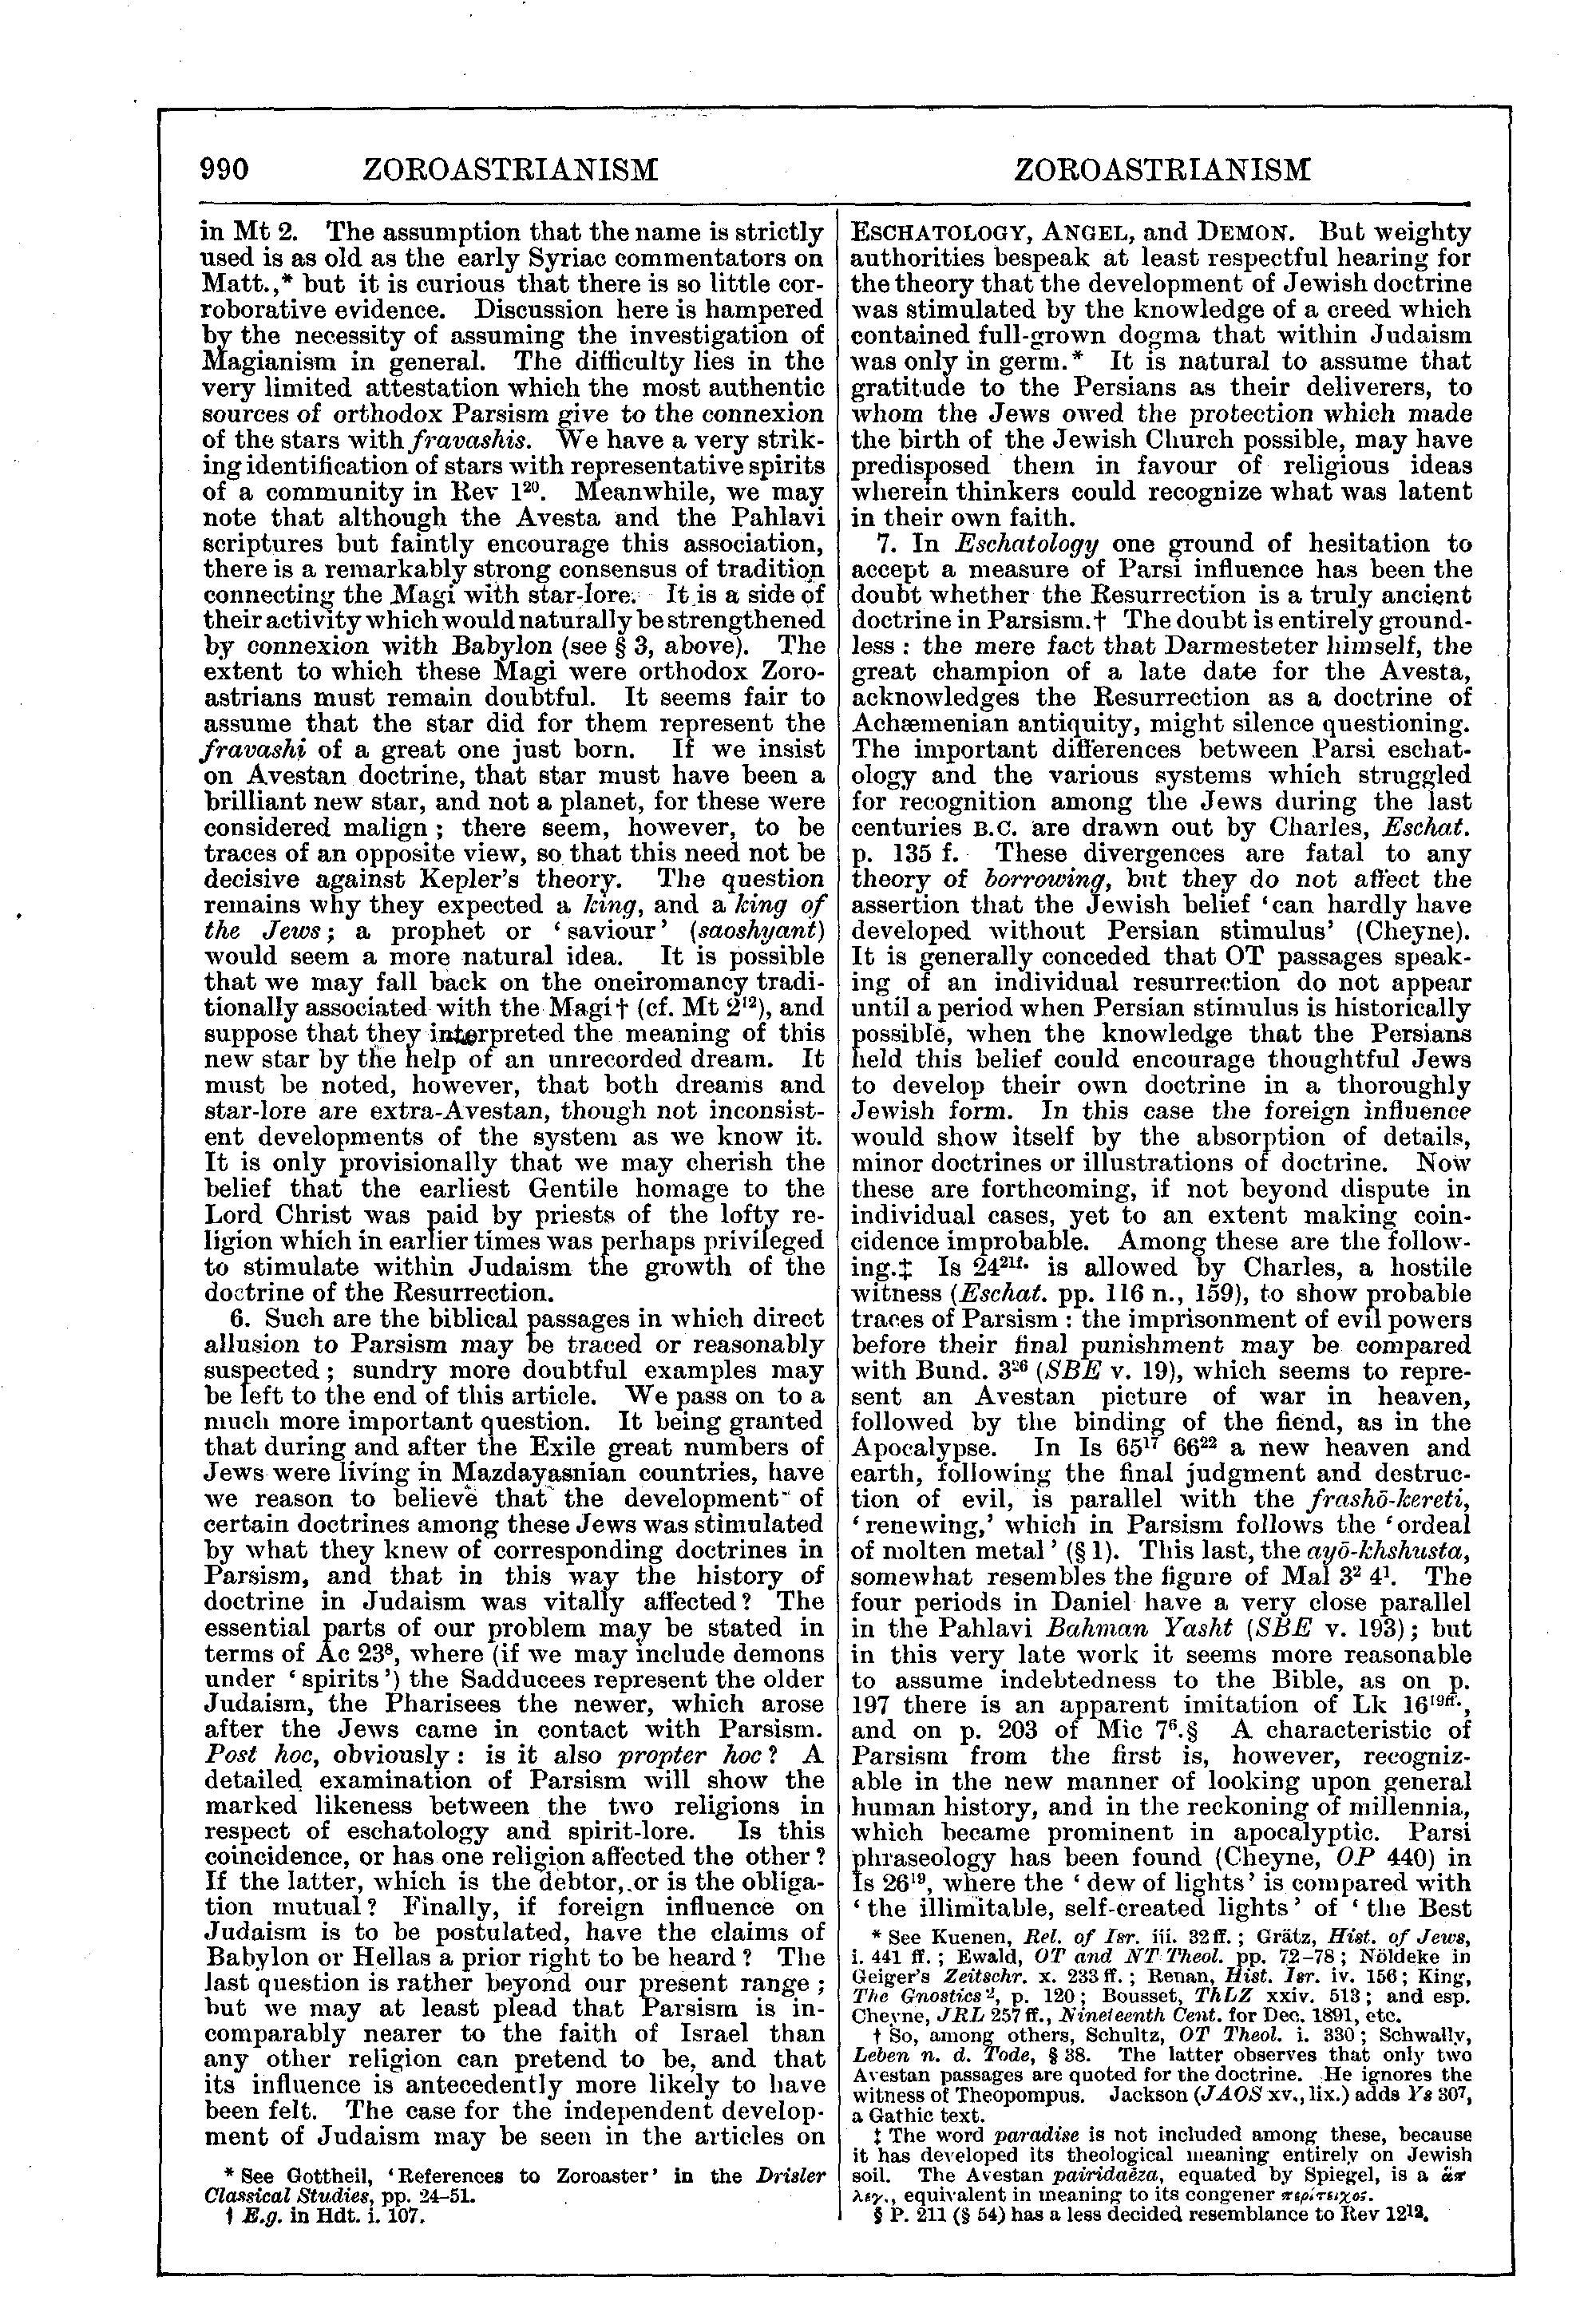 Image of page 990